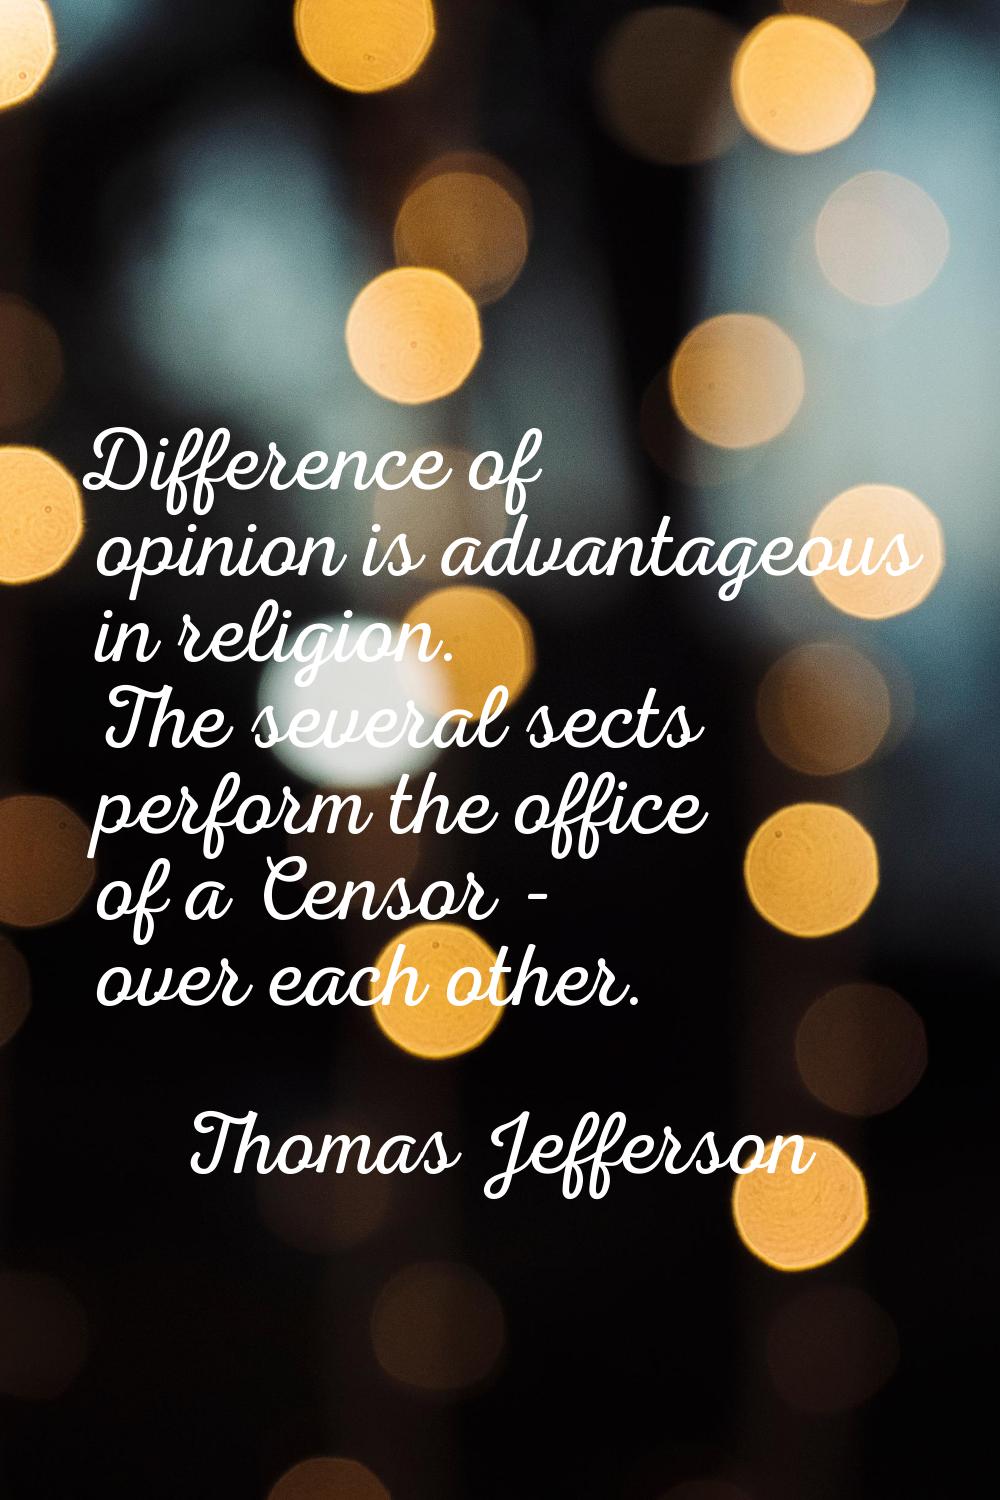 Difference of opinion is advantageous in religion. The several sects perform the office of a Censor